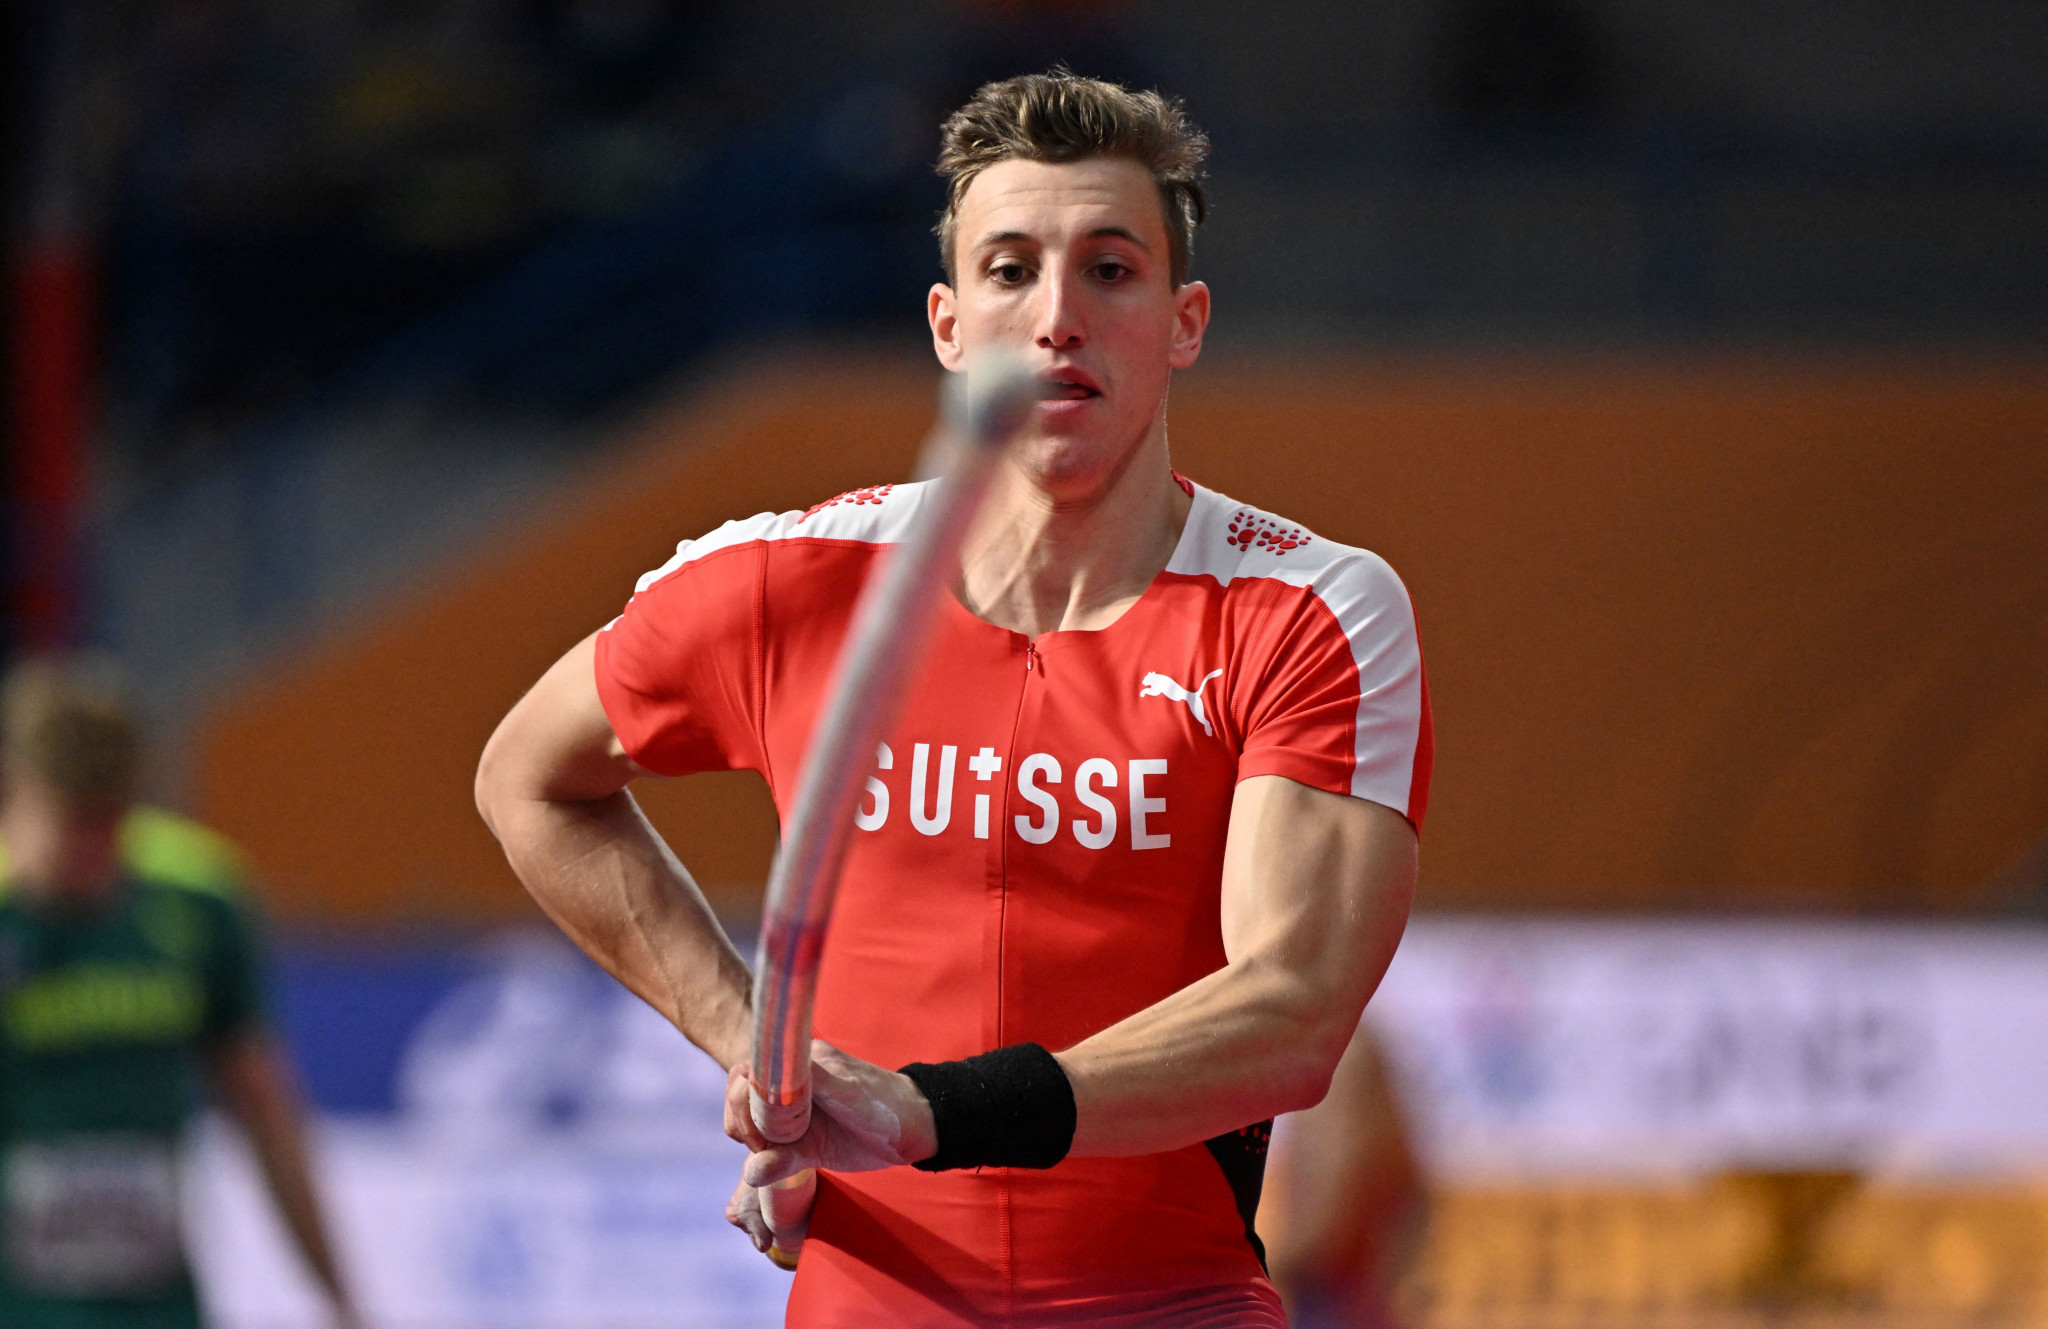 Switzerland's Simon Ehammer posted the joint-highest mark in the pole vault on his way to winning the men's decathlon event in Ratingen ©Getty Images